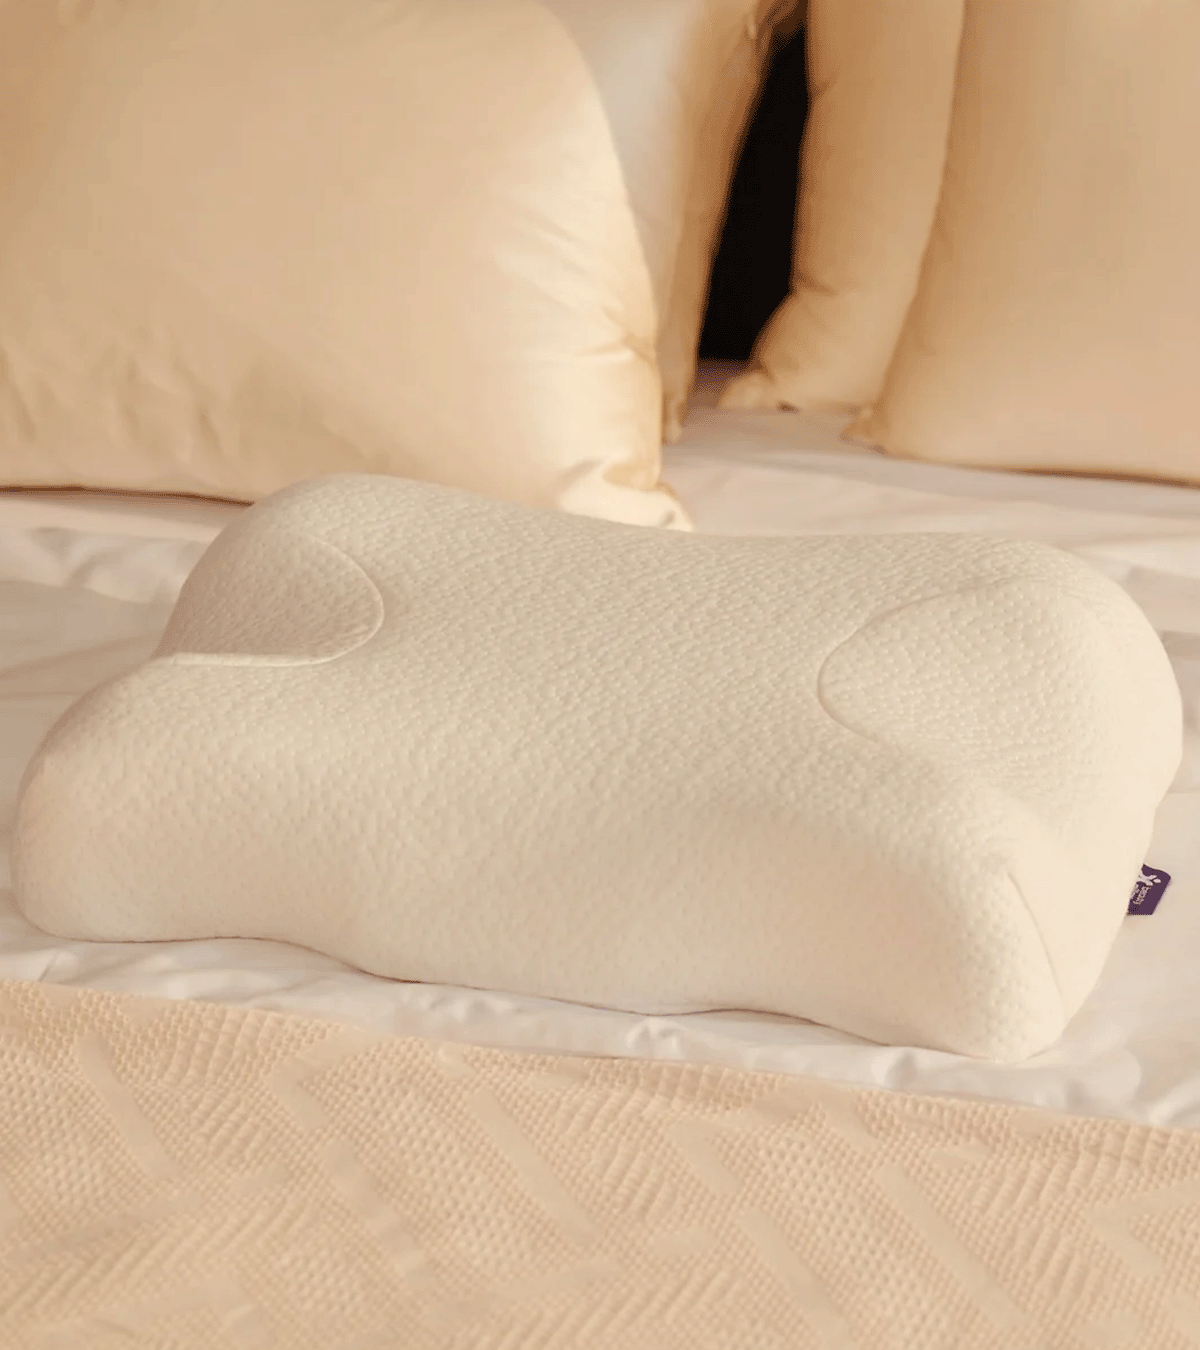 YourFacePillow - Memory Foam Beauty Pillow for Anti Wrinkle, Anti